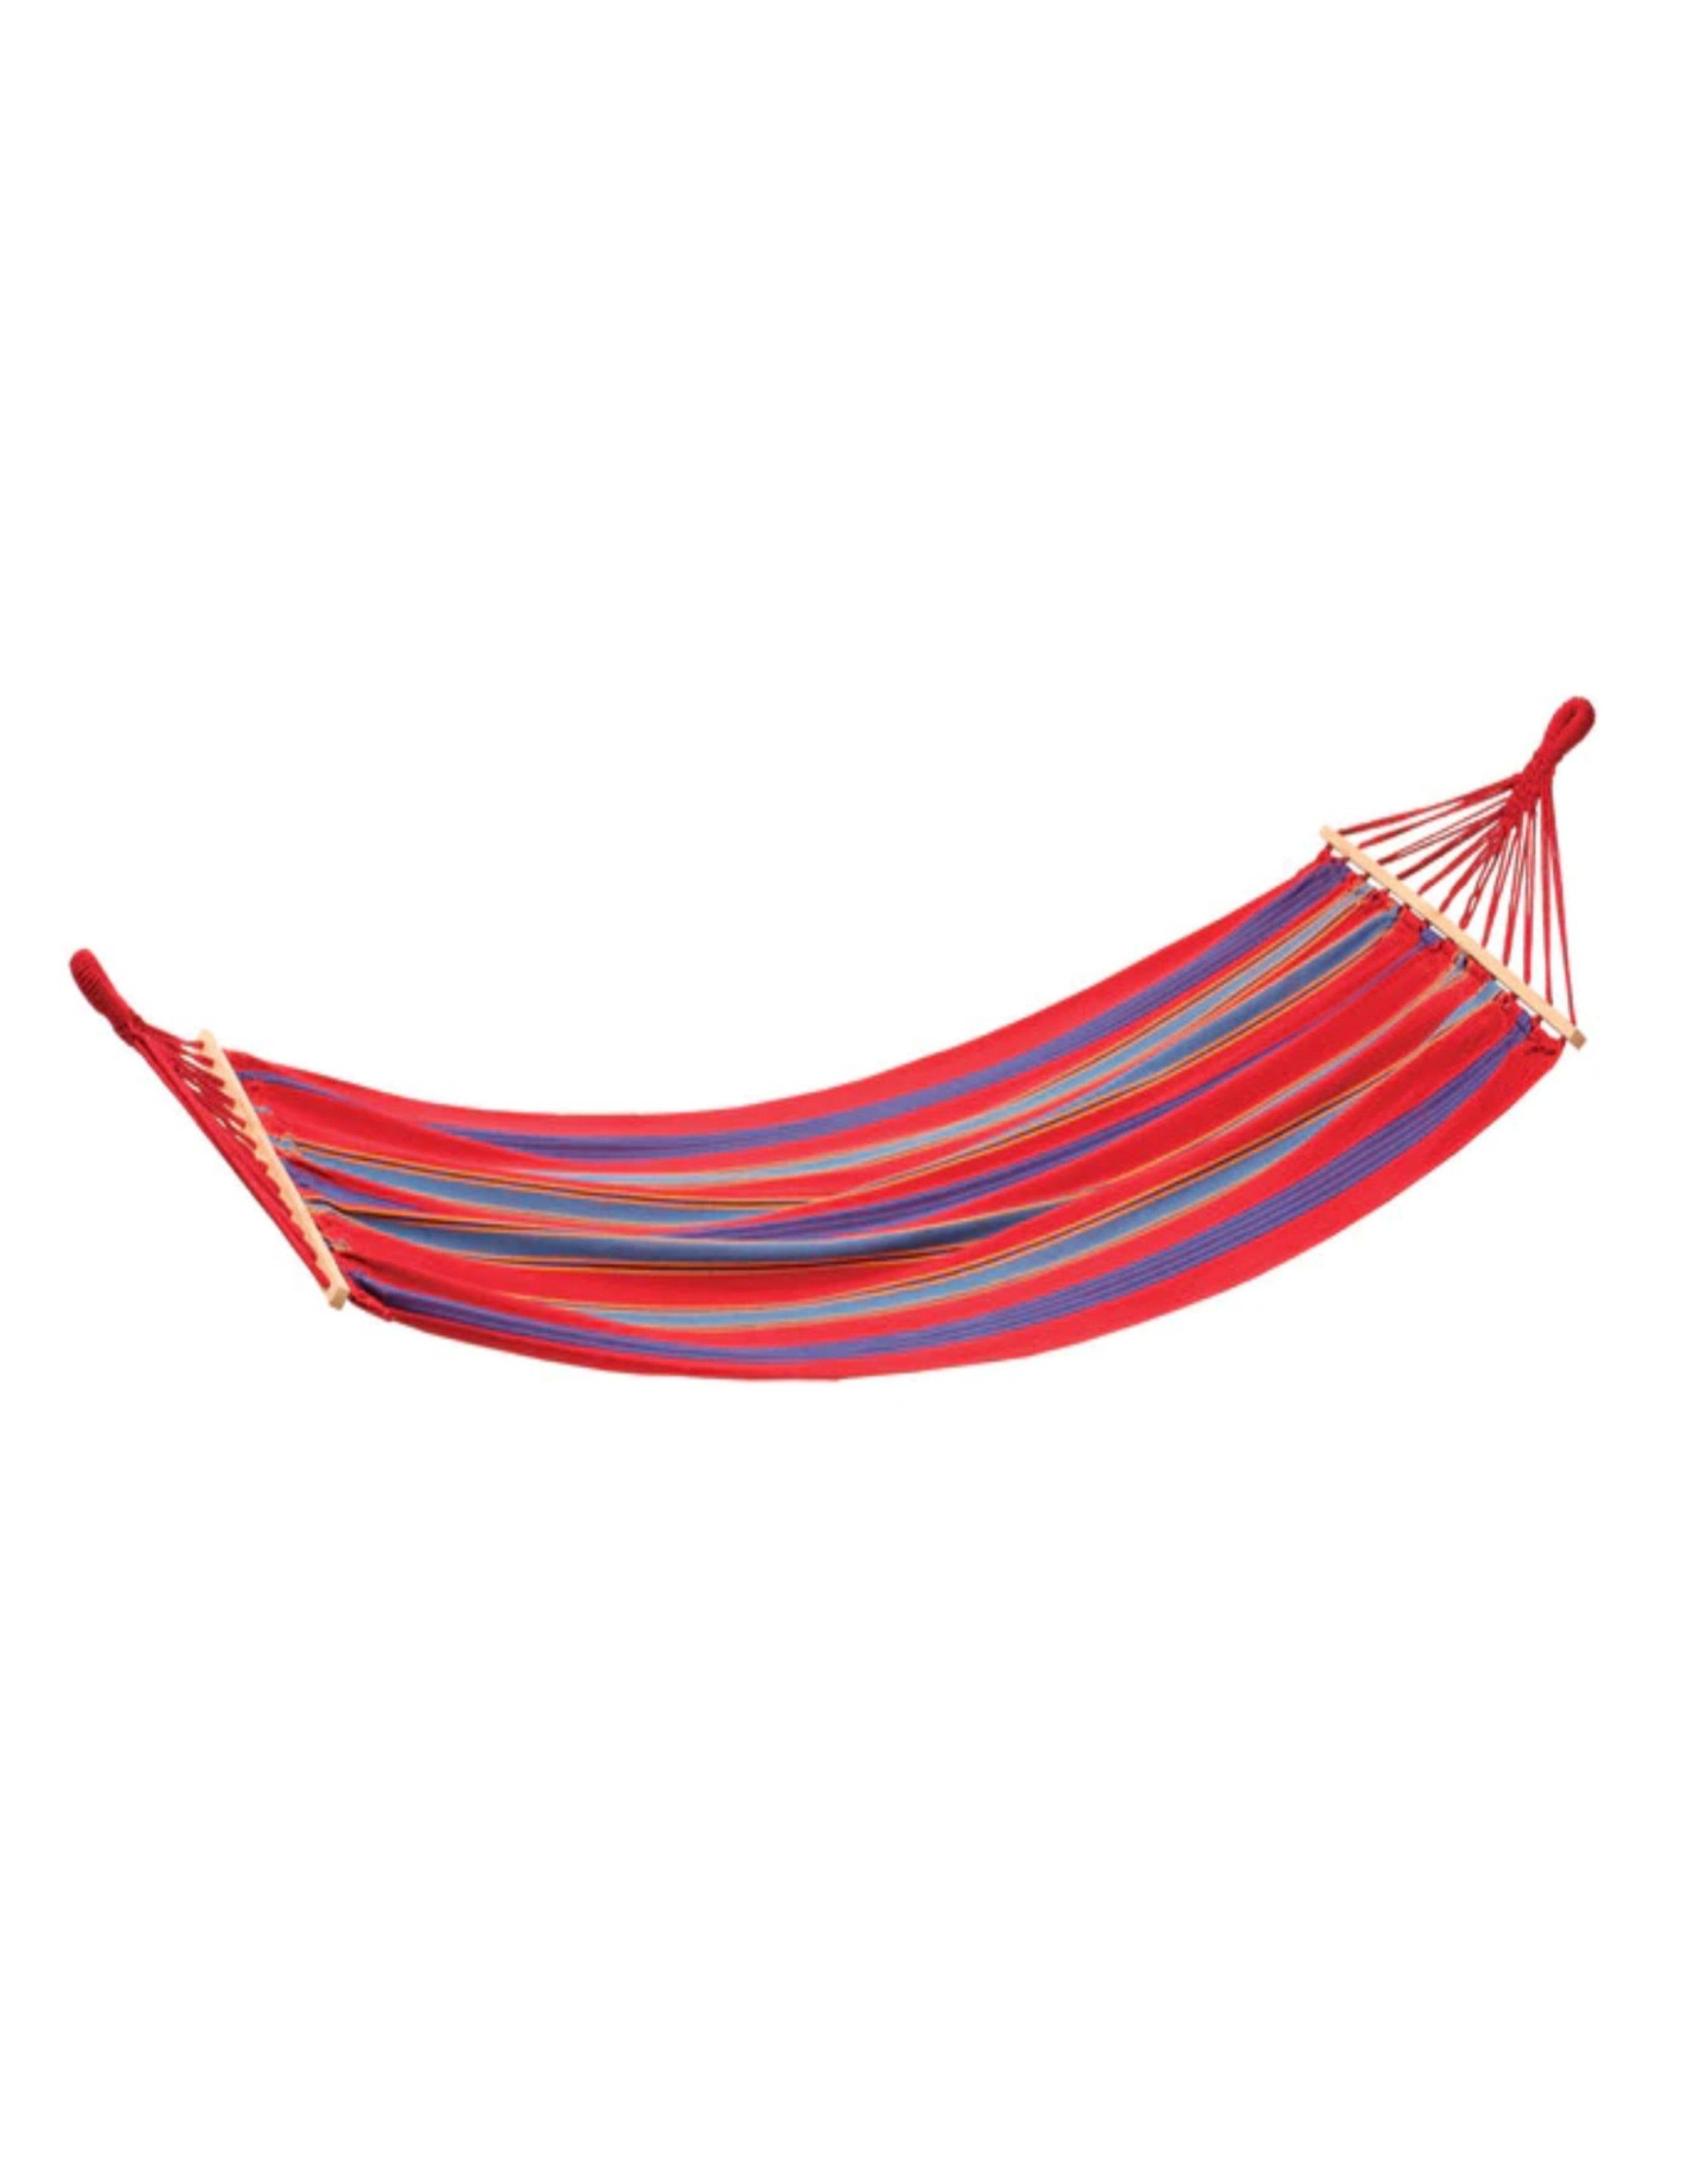 Stansport Cotton Blend Bahamas Hammock - Leapfrog Outdoor Sports and Apparel